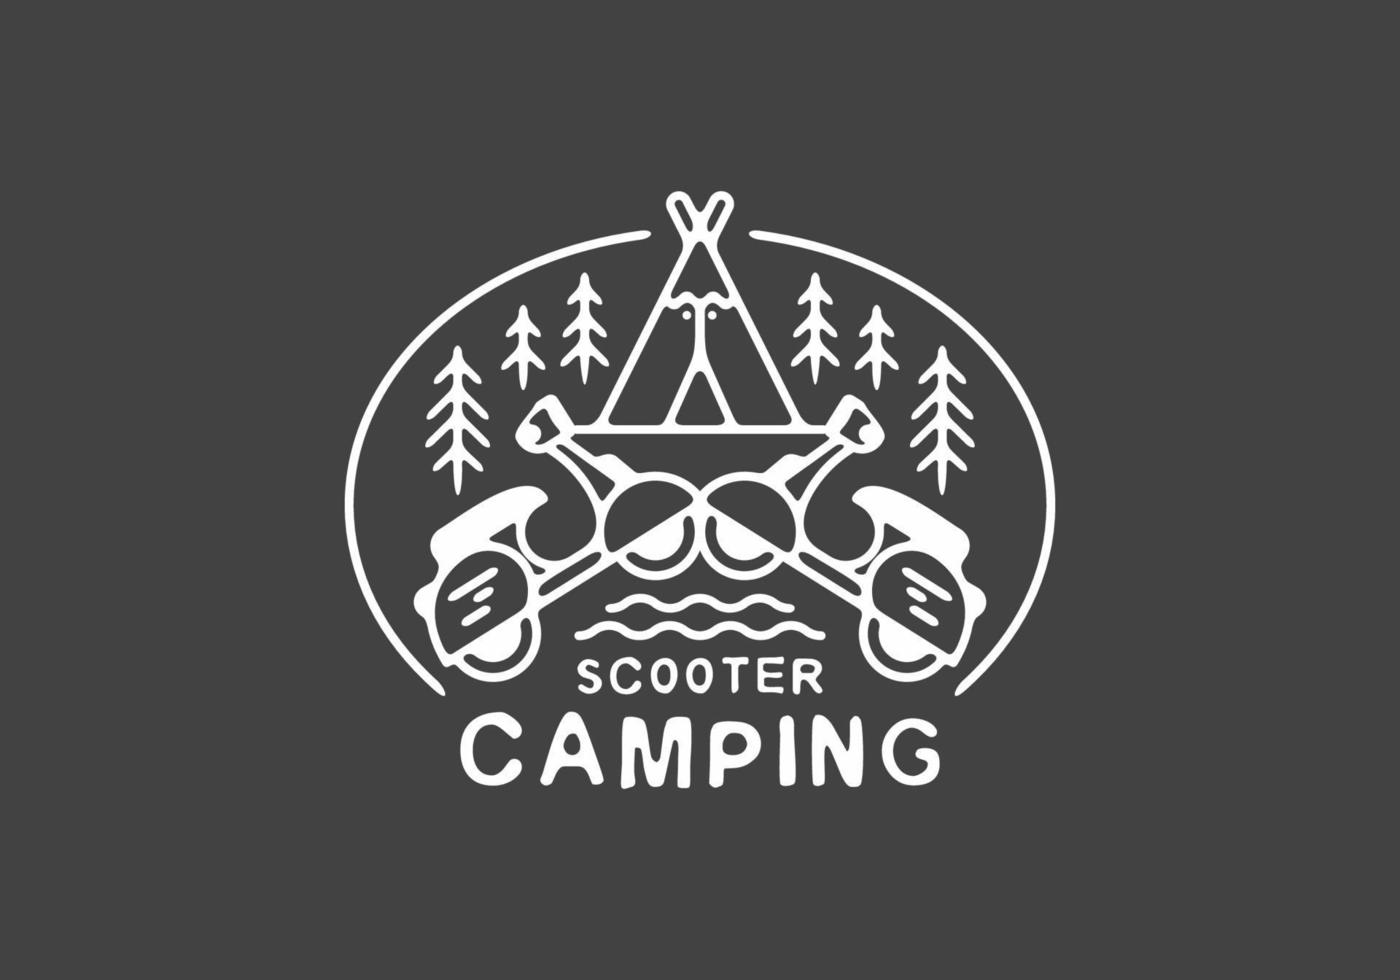 Scooter camping line art badge vector